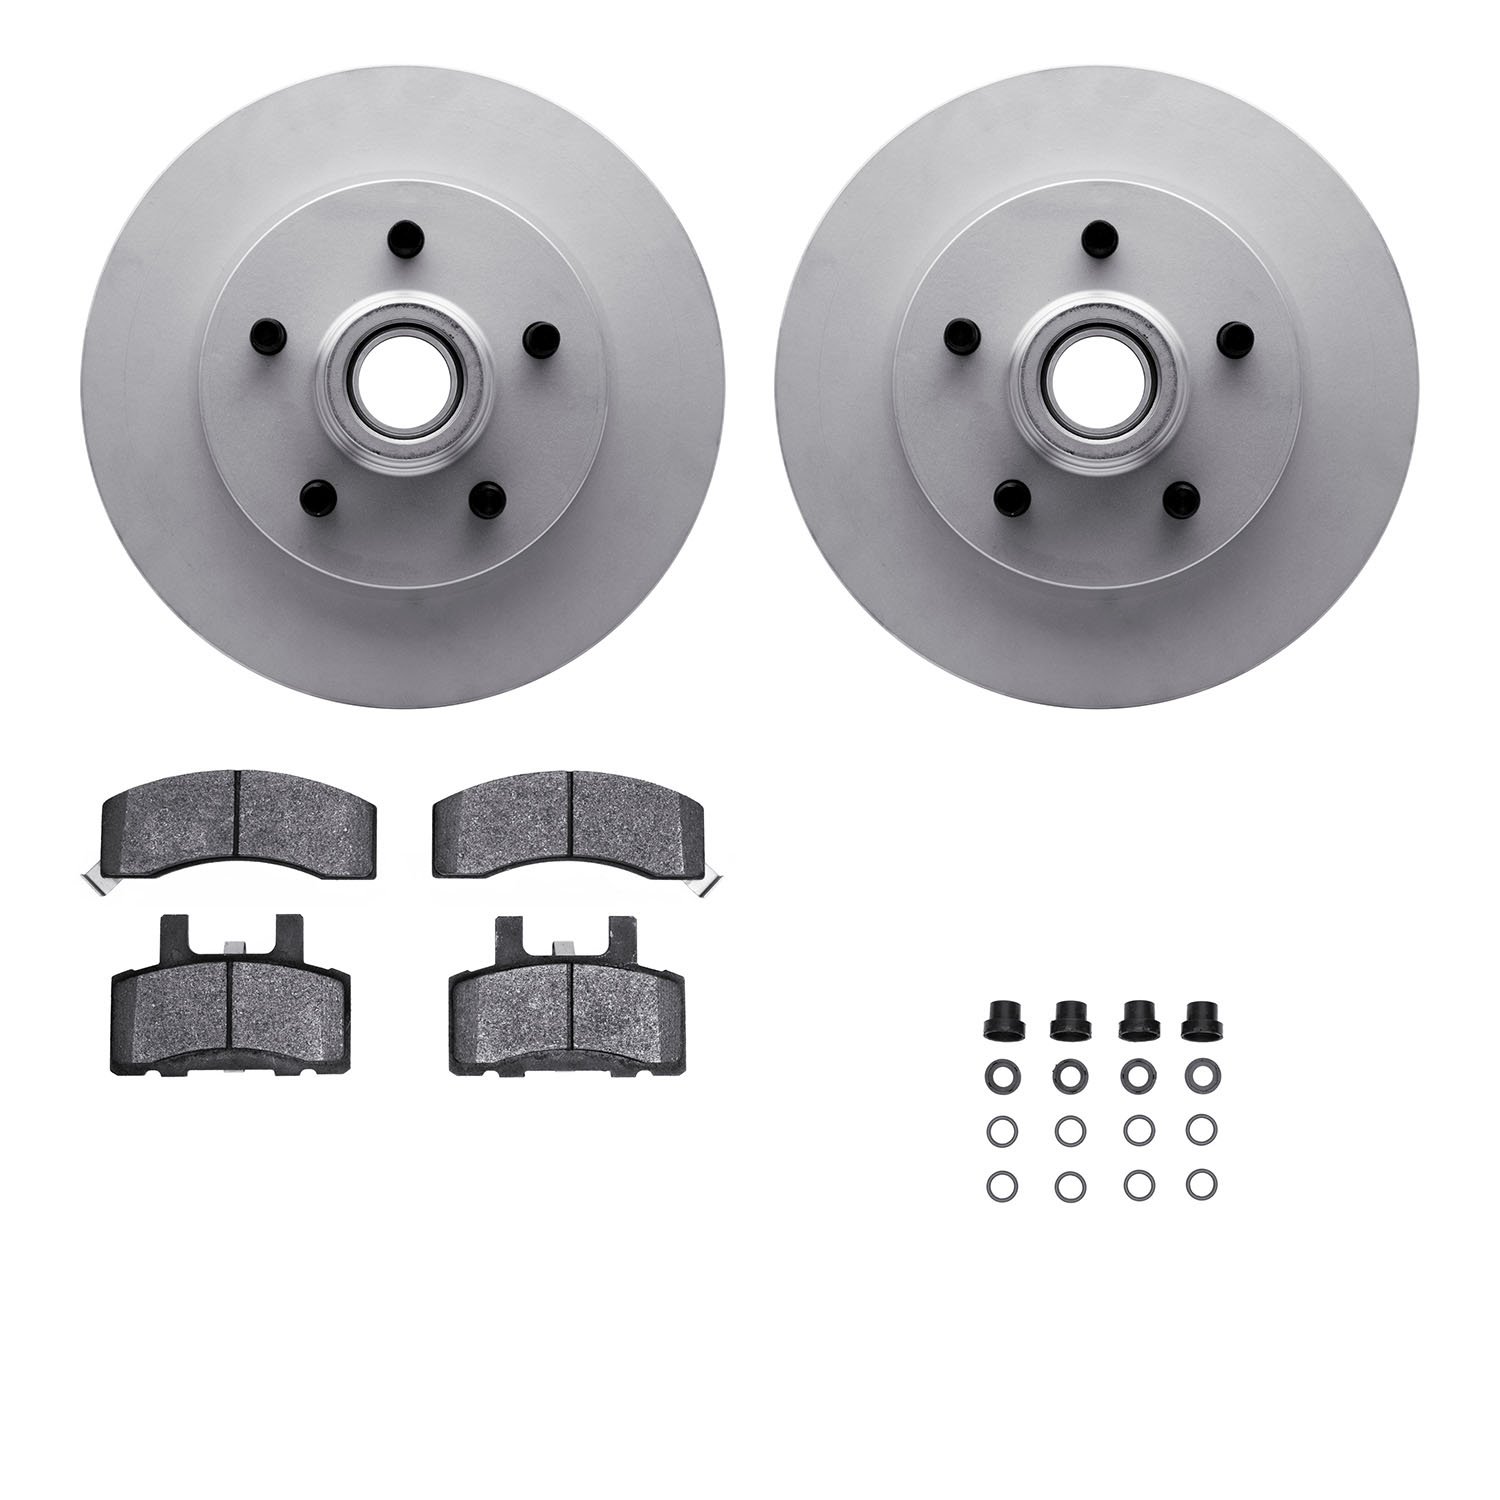 4412-48008 Geospec Brake Rotors with Ultimate-Duty Brake Pads & Hardware, 1998-2000 GM, Position: Front